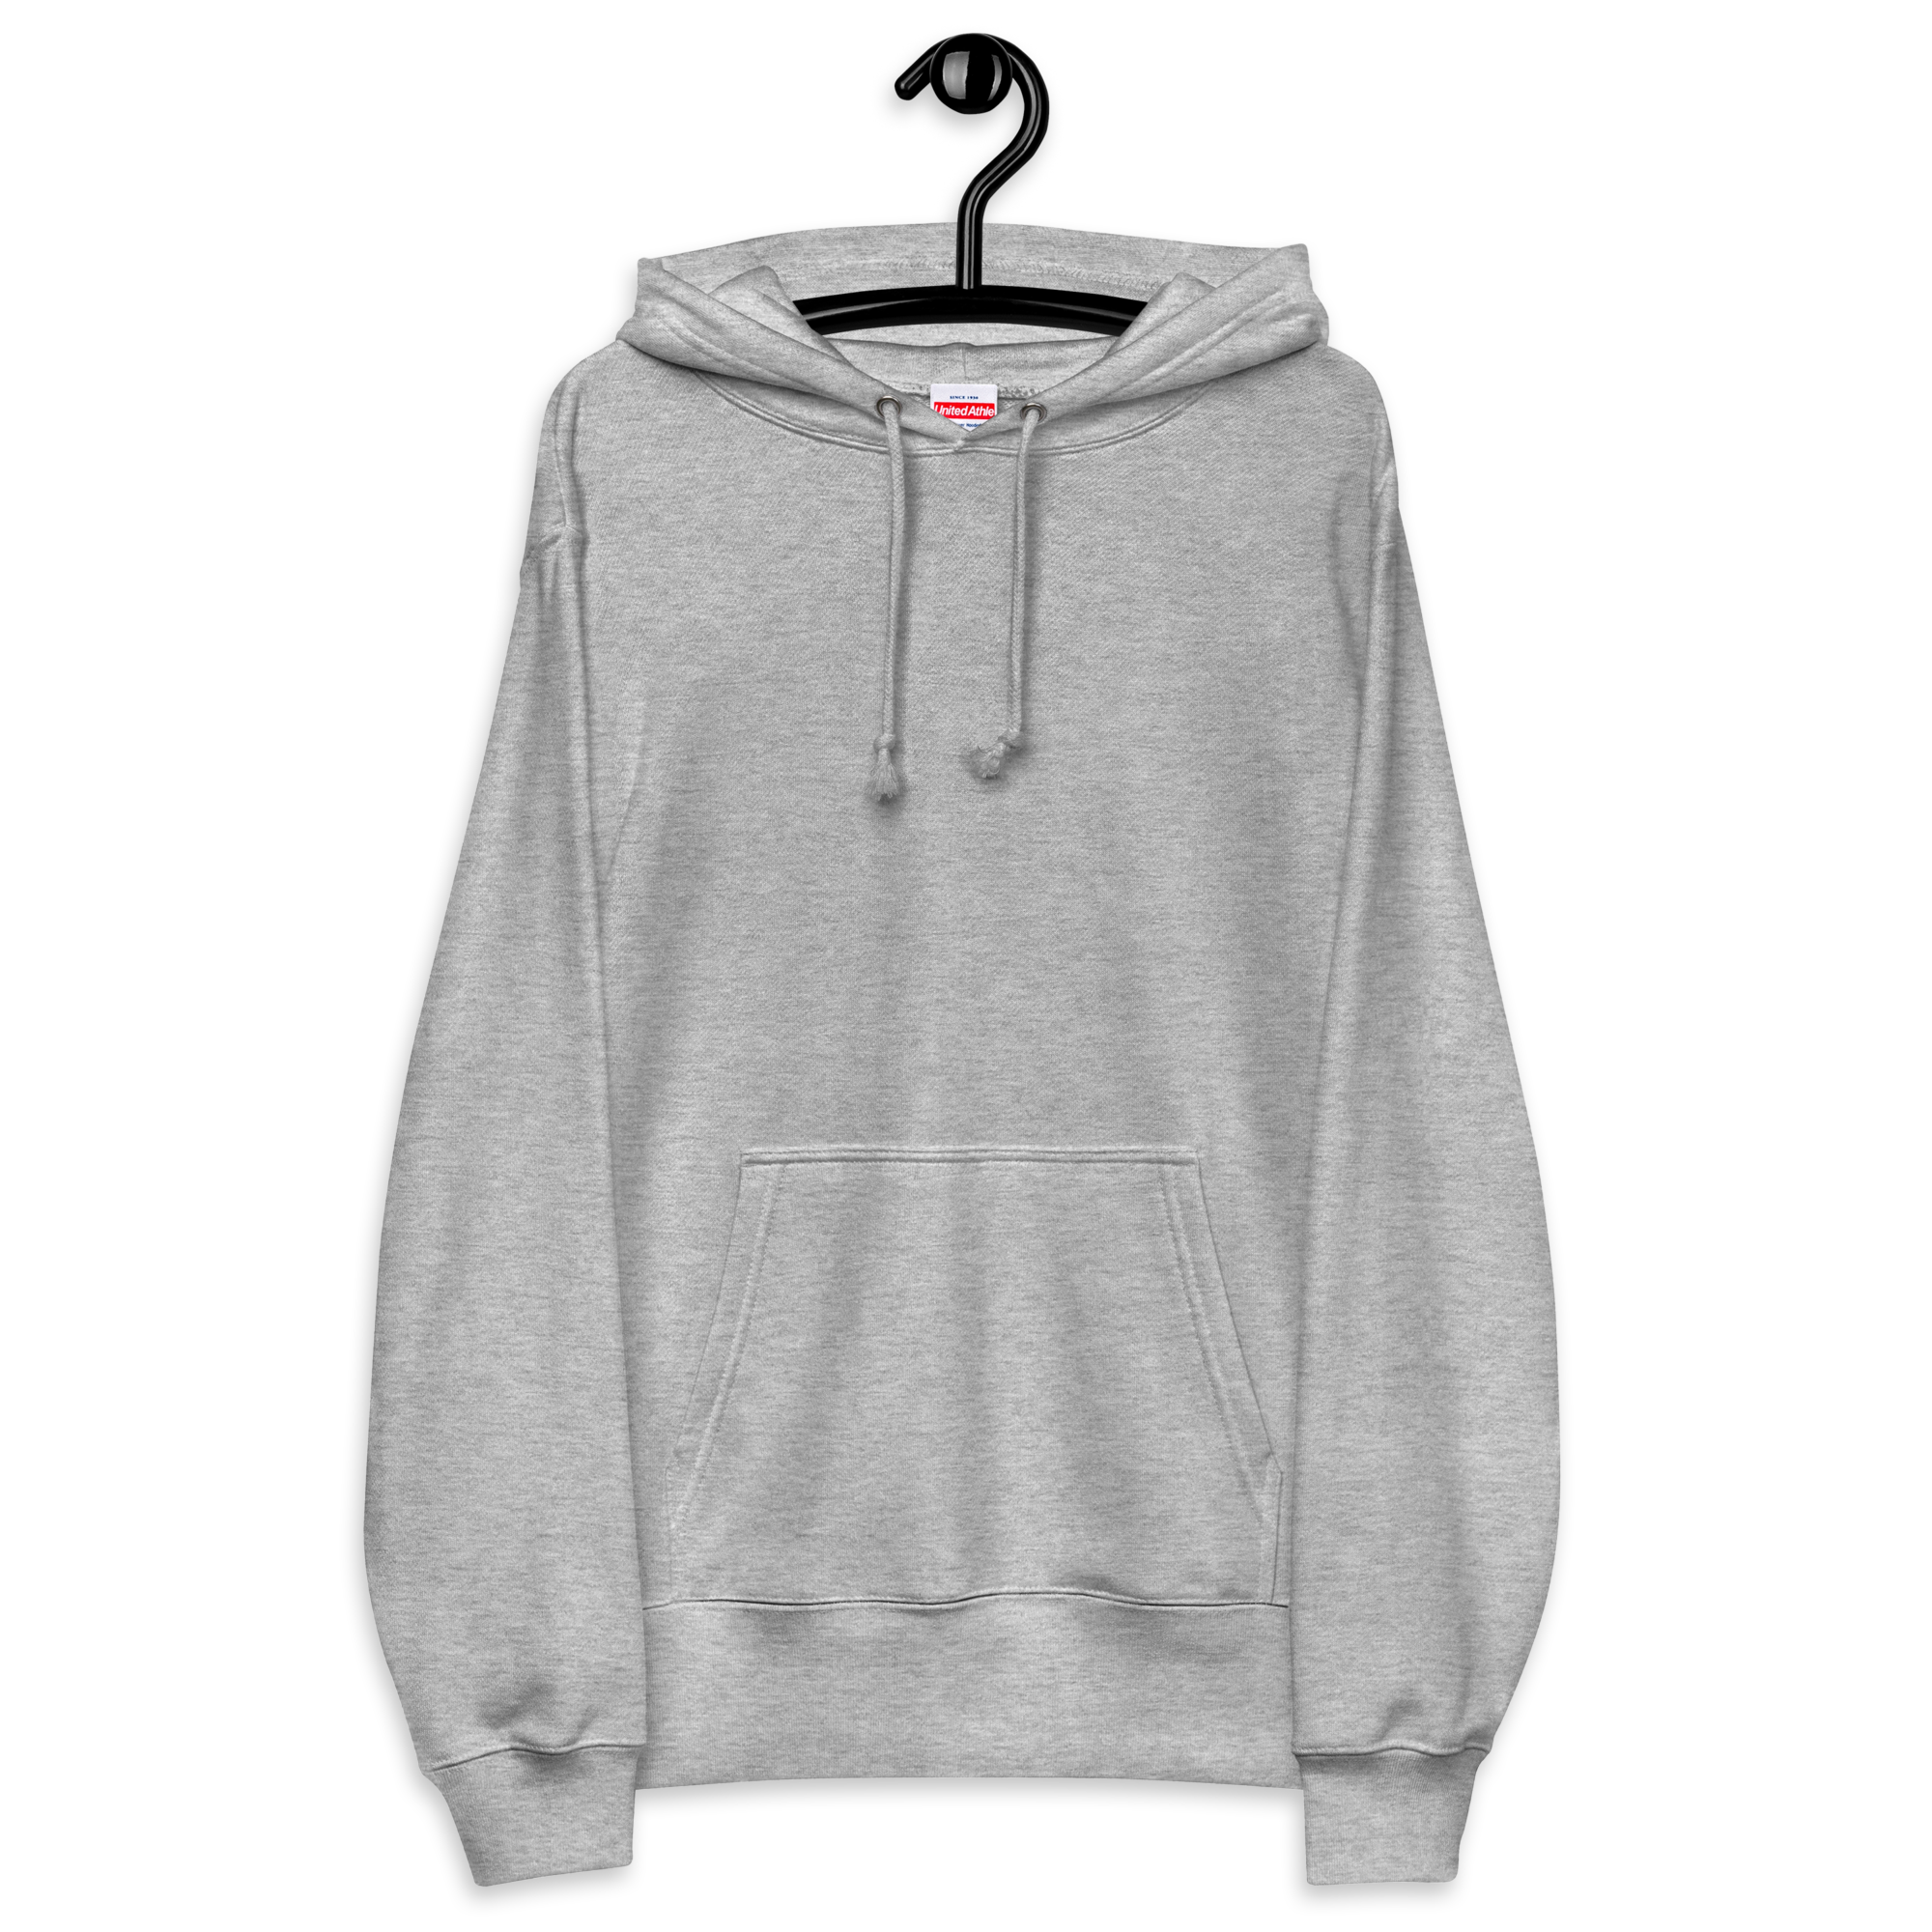 "Champion by Birth, Swimmer by Choice." pullover hoodie